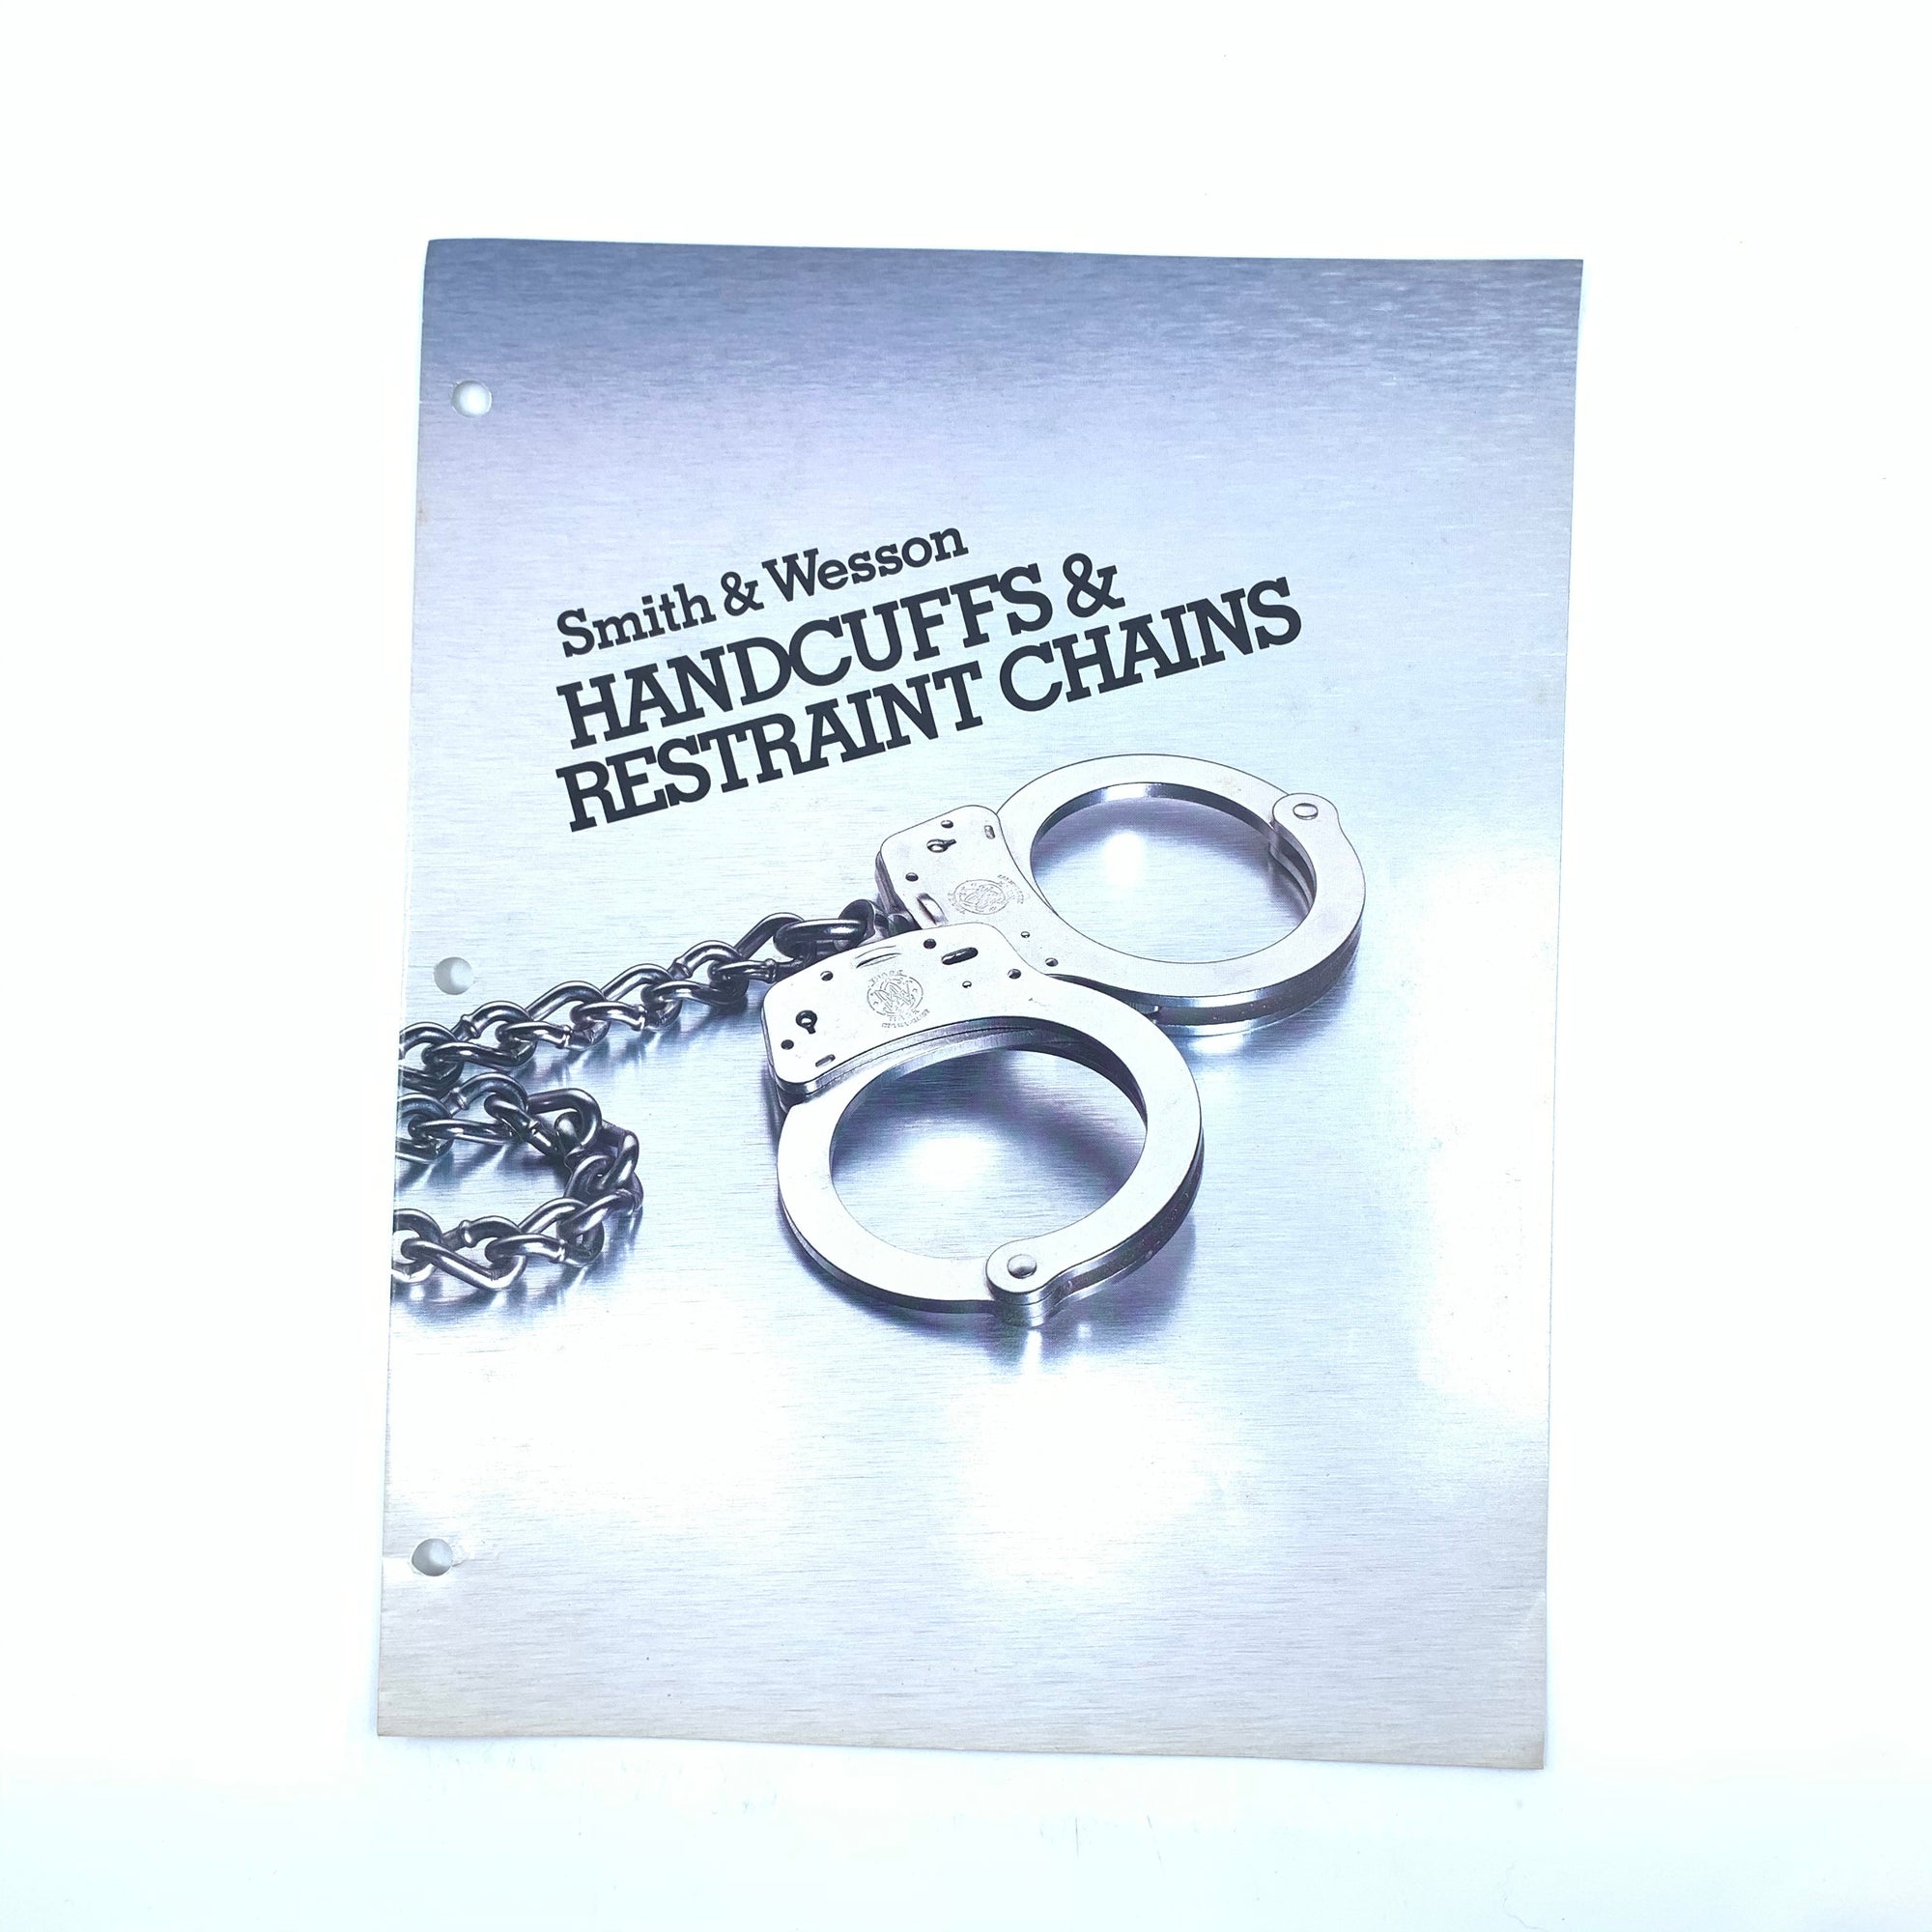 Smith & Wesson 1989 & 1991 Catalogues and S&W Handcuff Brochure